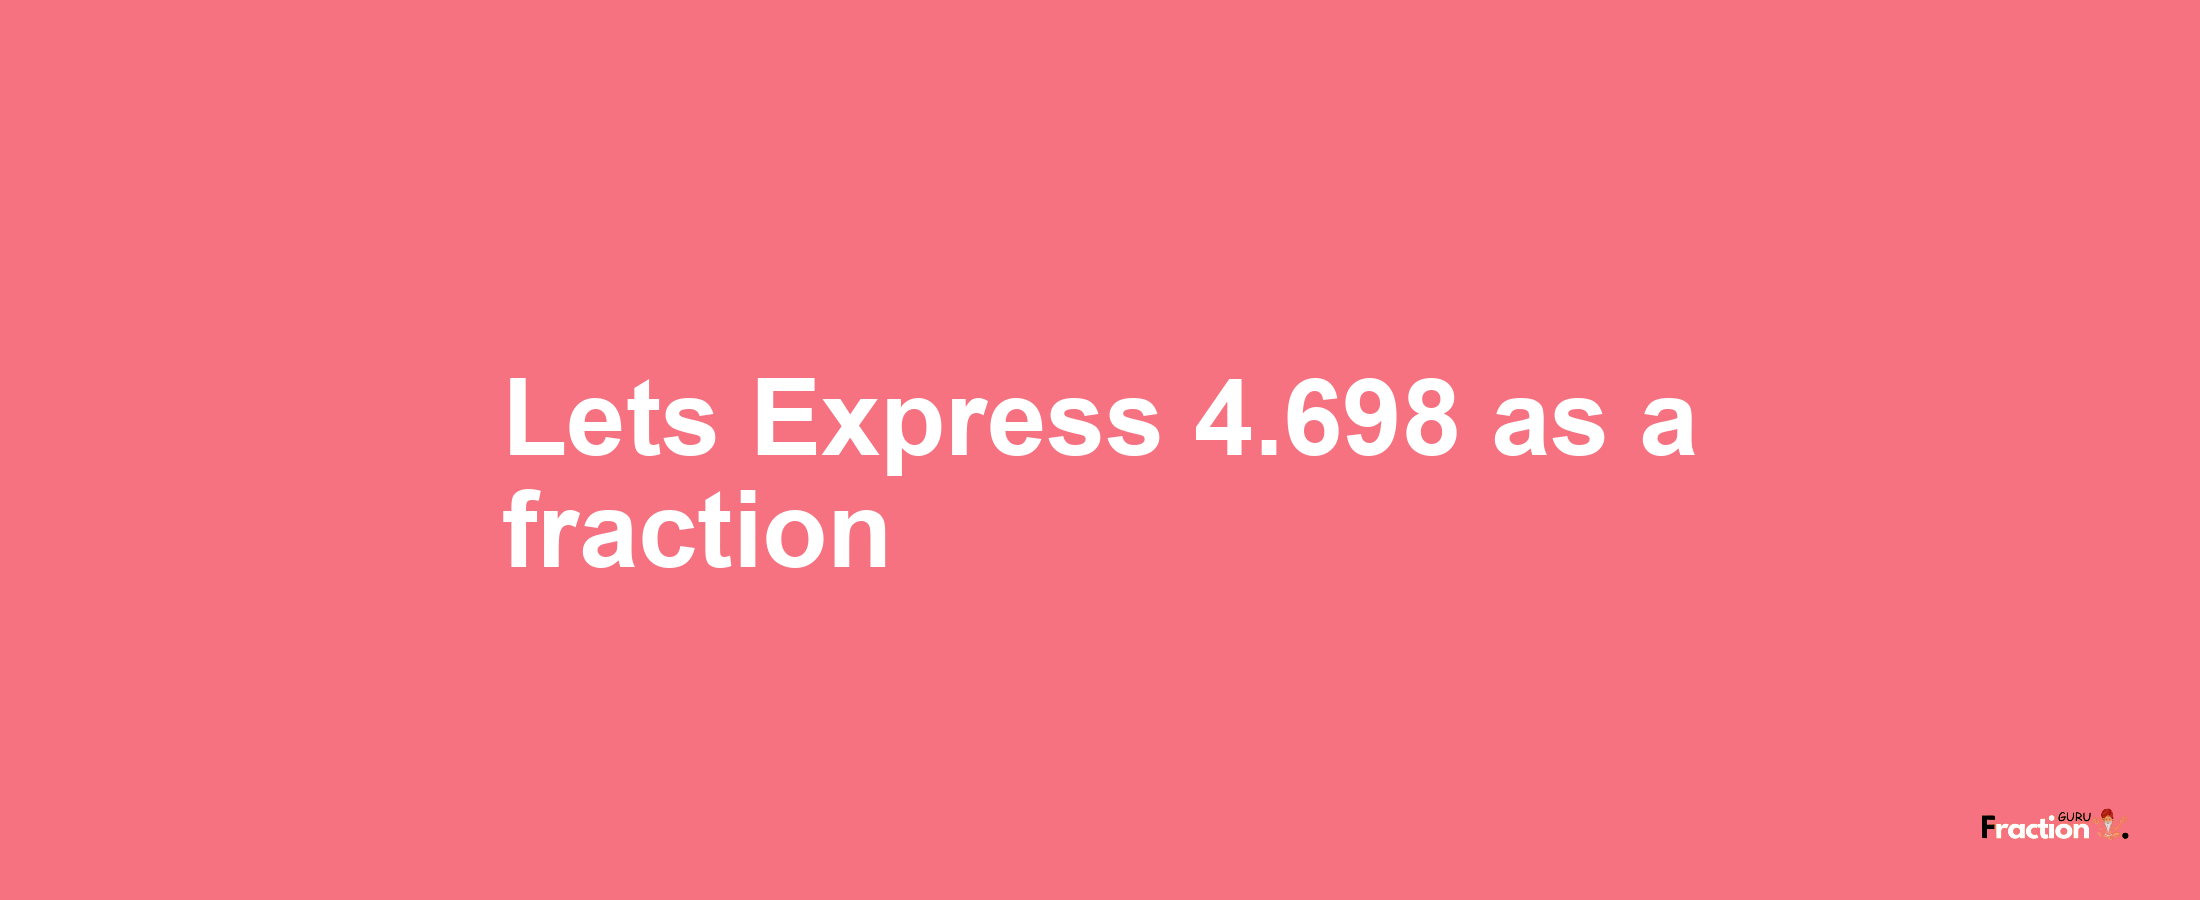 Lets Express 4.698 as afraction